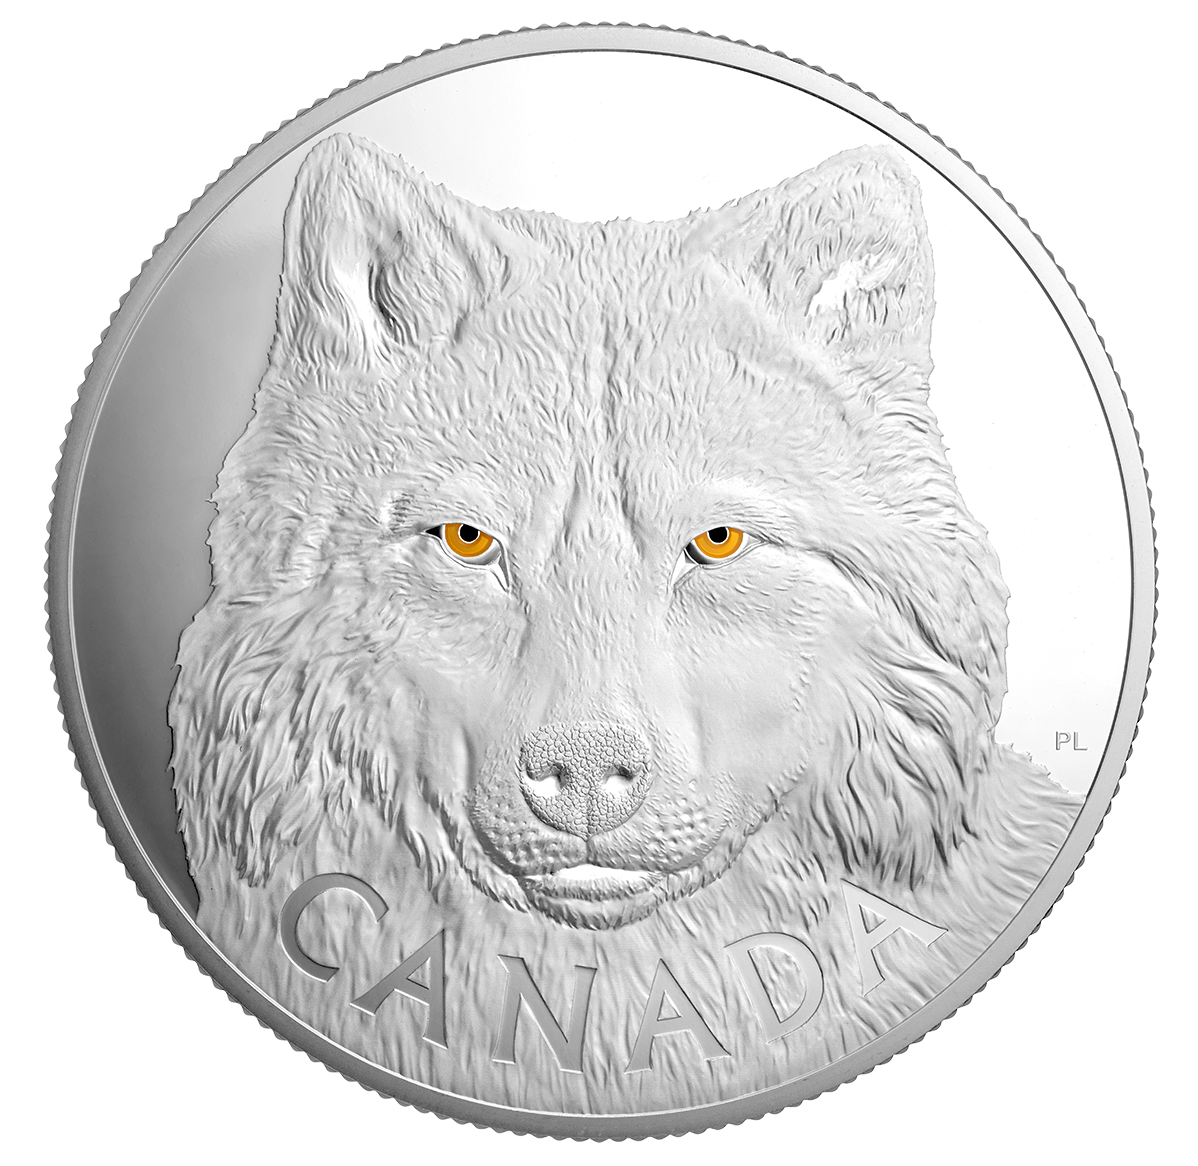 Pure Silver One-Kilogram Coin - In the Eyes of the Timber Wolf